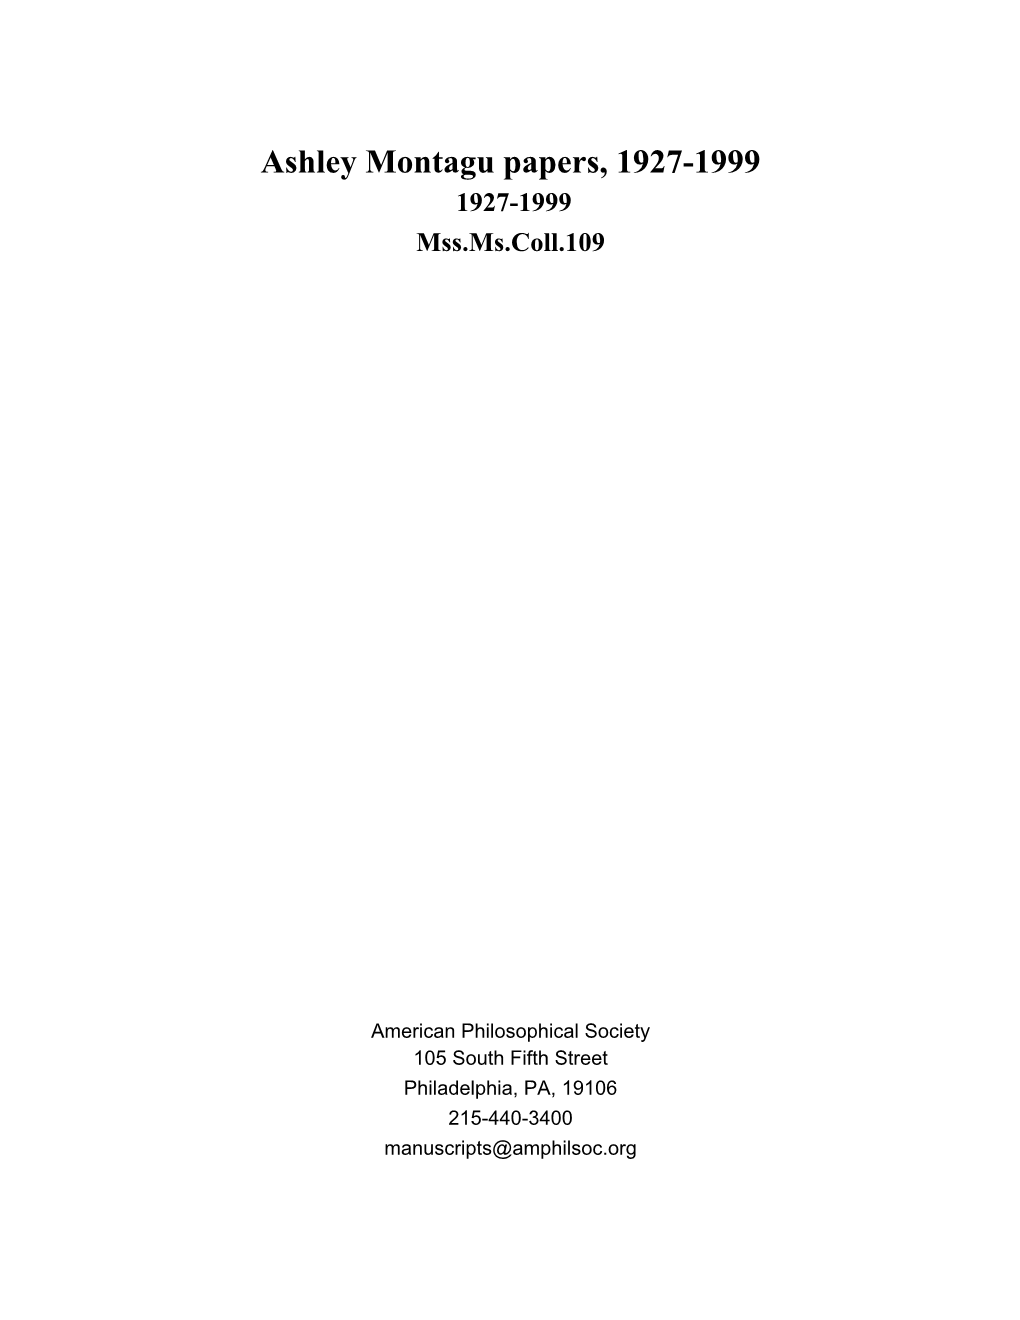 Ashley Montagu Papers, 1927-1999 1927-1999 Mss.Ms.Coll.109